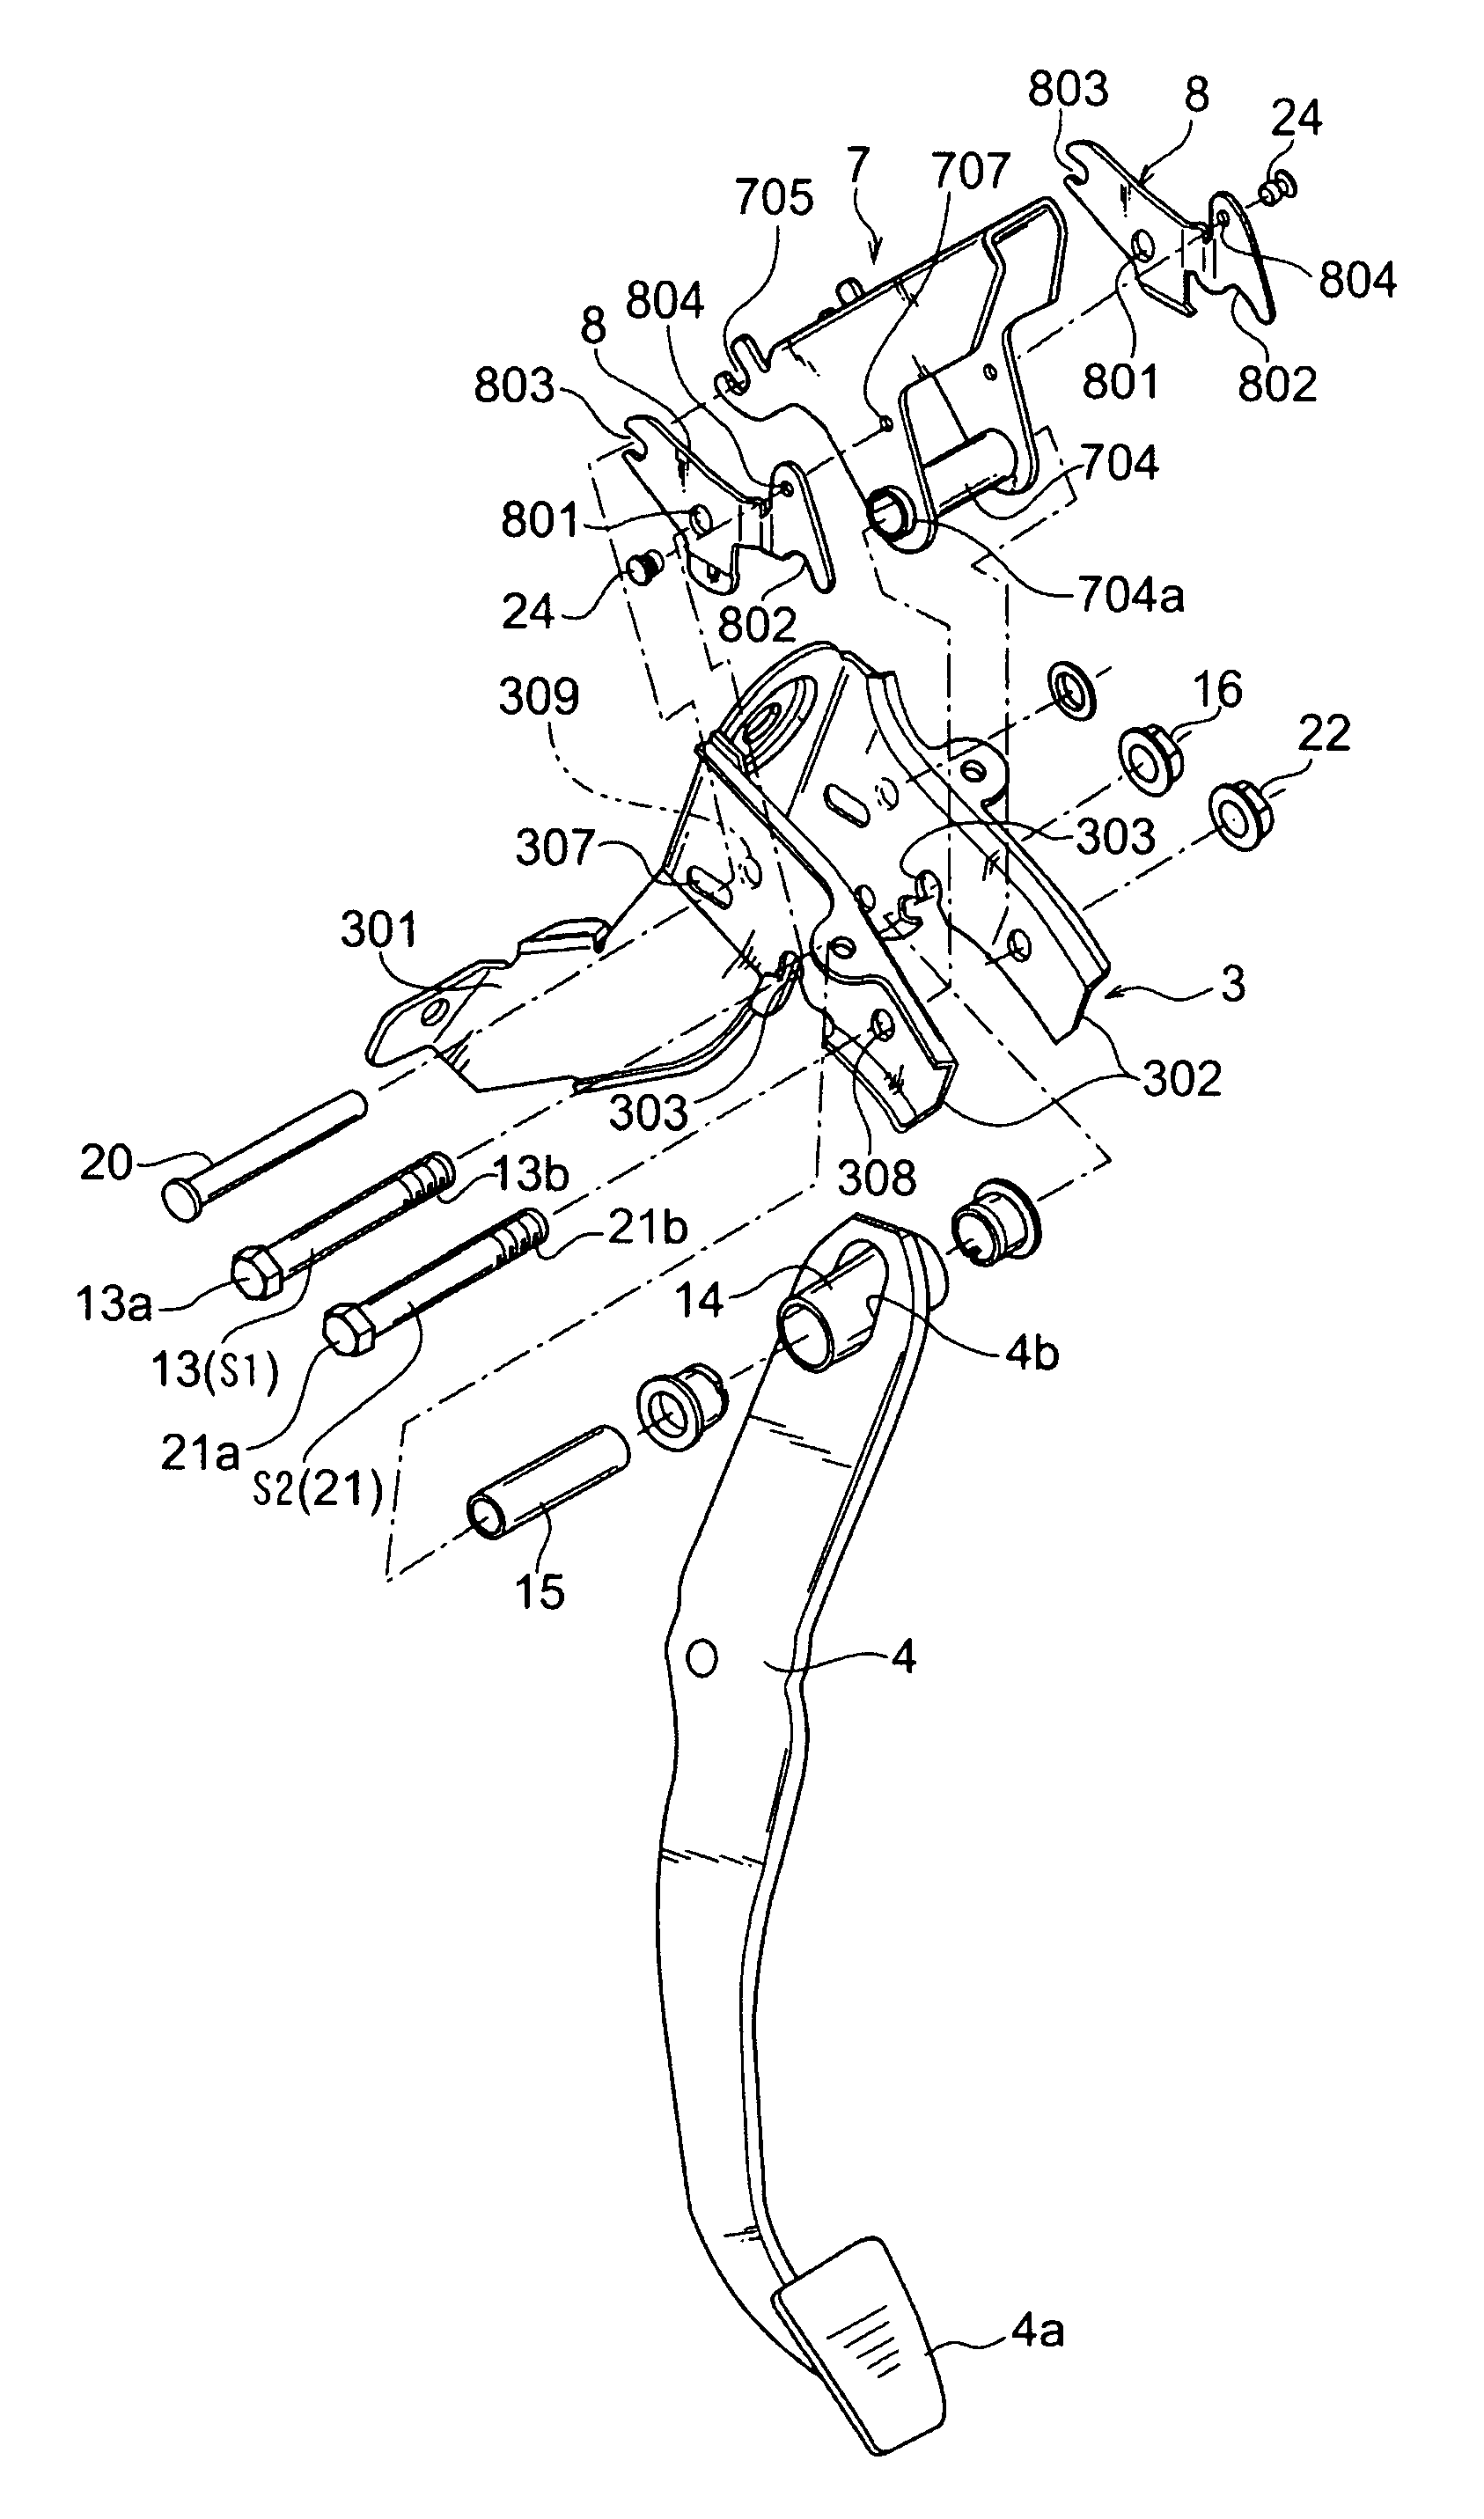 Support structure for control pedal of vehicle